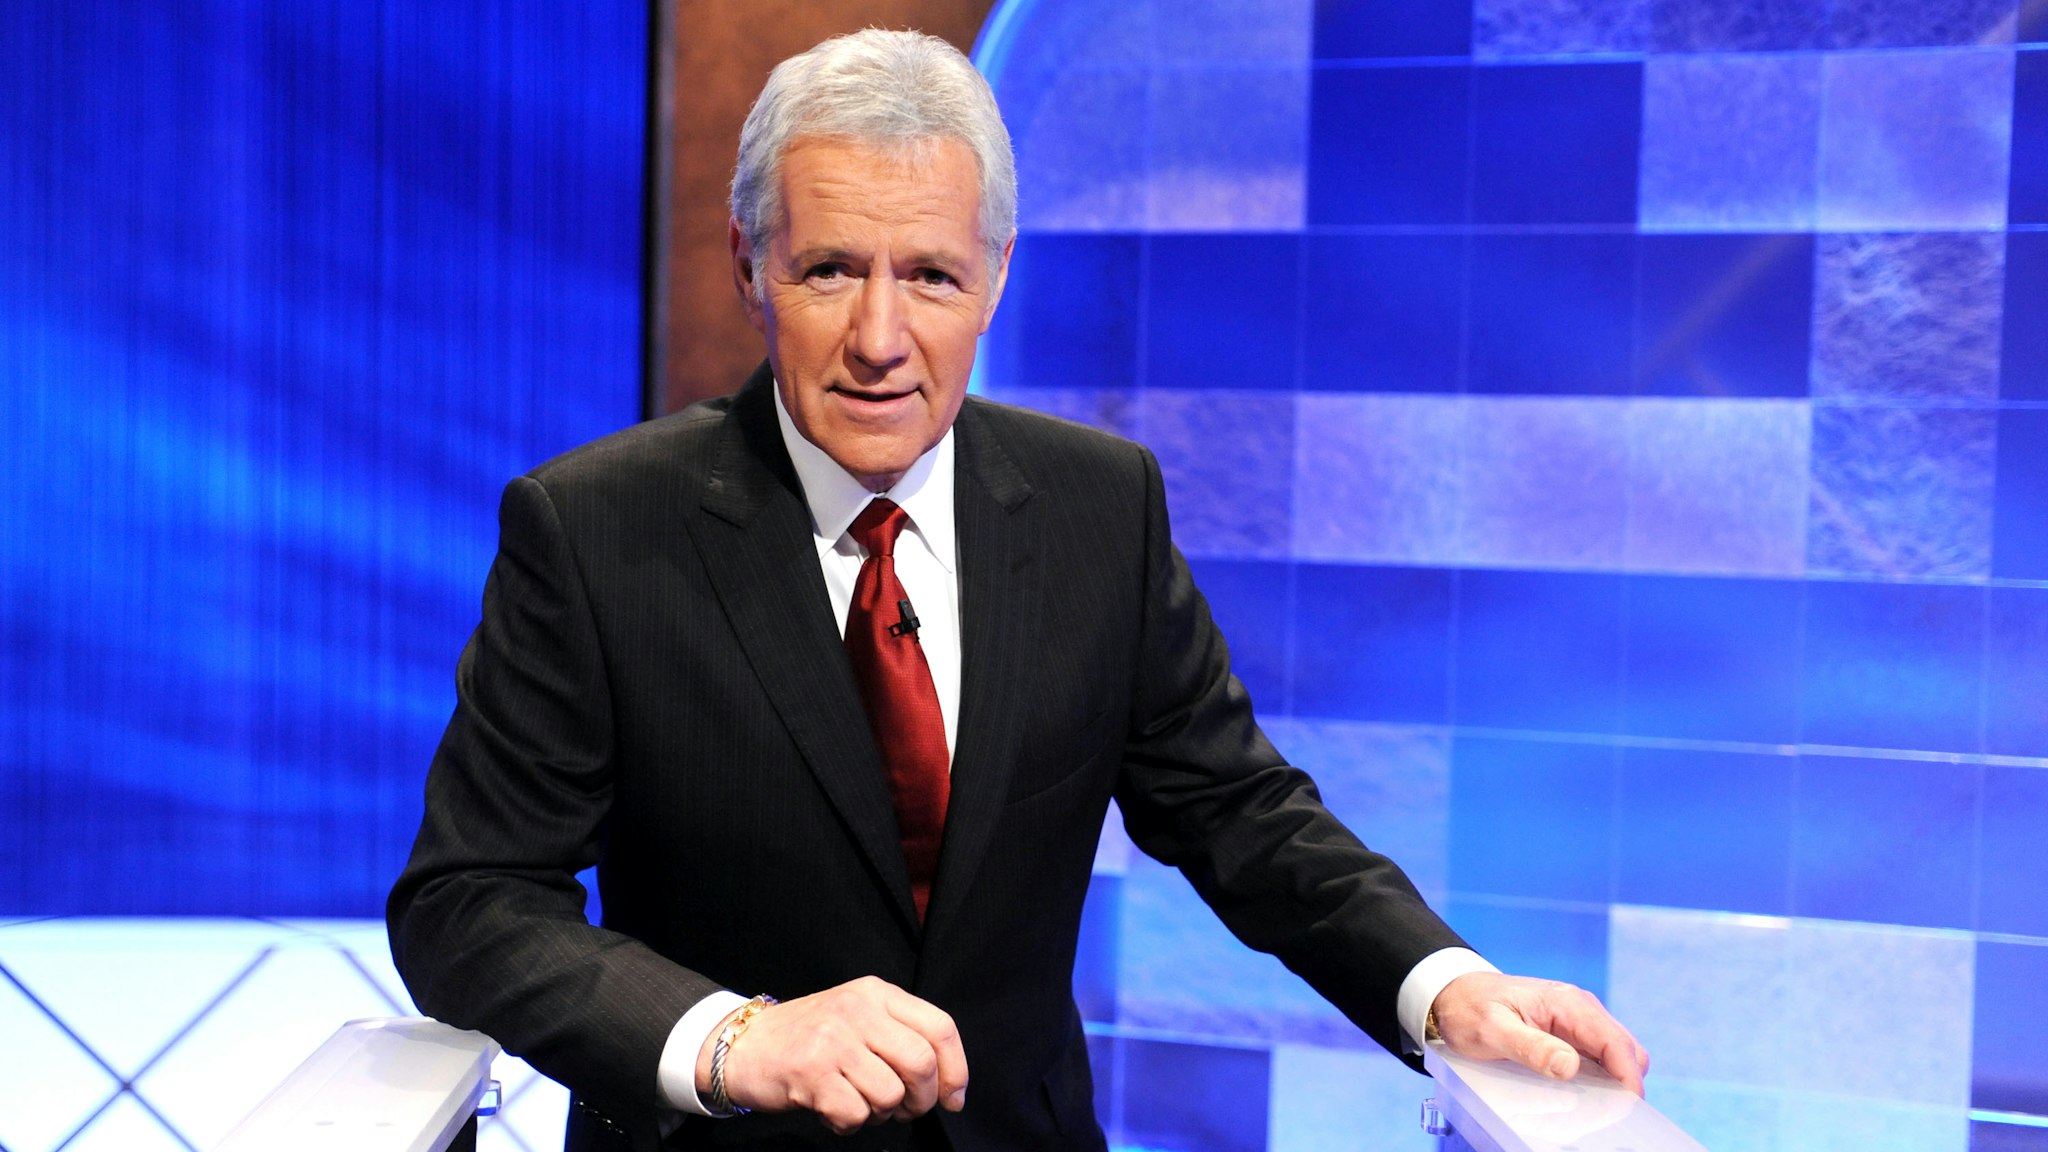 CULVER CITY, CA - APRIL 17: Game show host Alex Trebek poses on the set of the "Jeopardy!" Million Dollar Celebrity Invitational Tournament Show Taping on April 17, 2010 in Culver City, California.